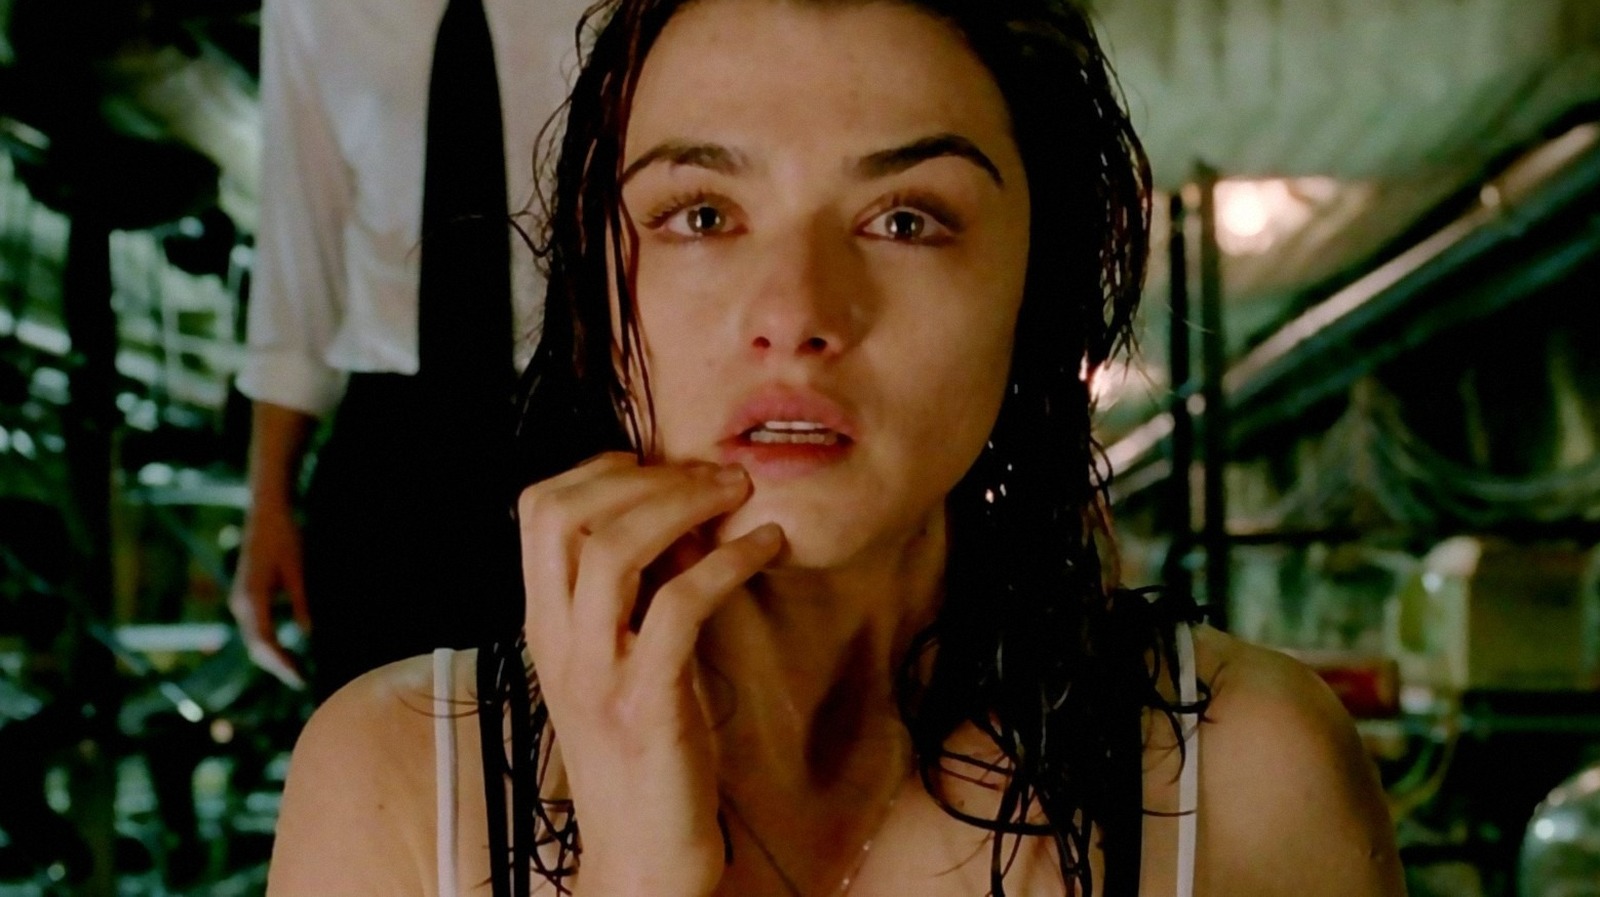 #Rachel Weisz Put Her Faith In Keanu Reeves For One Of Constantine’s Most Intense Scenes